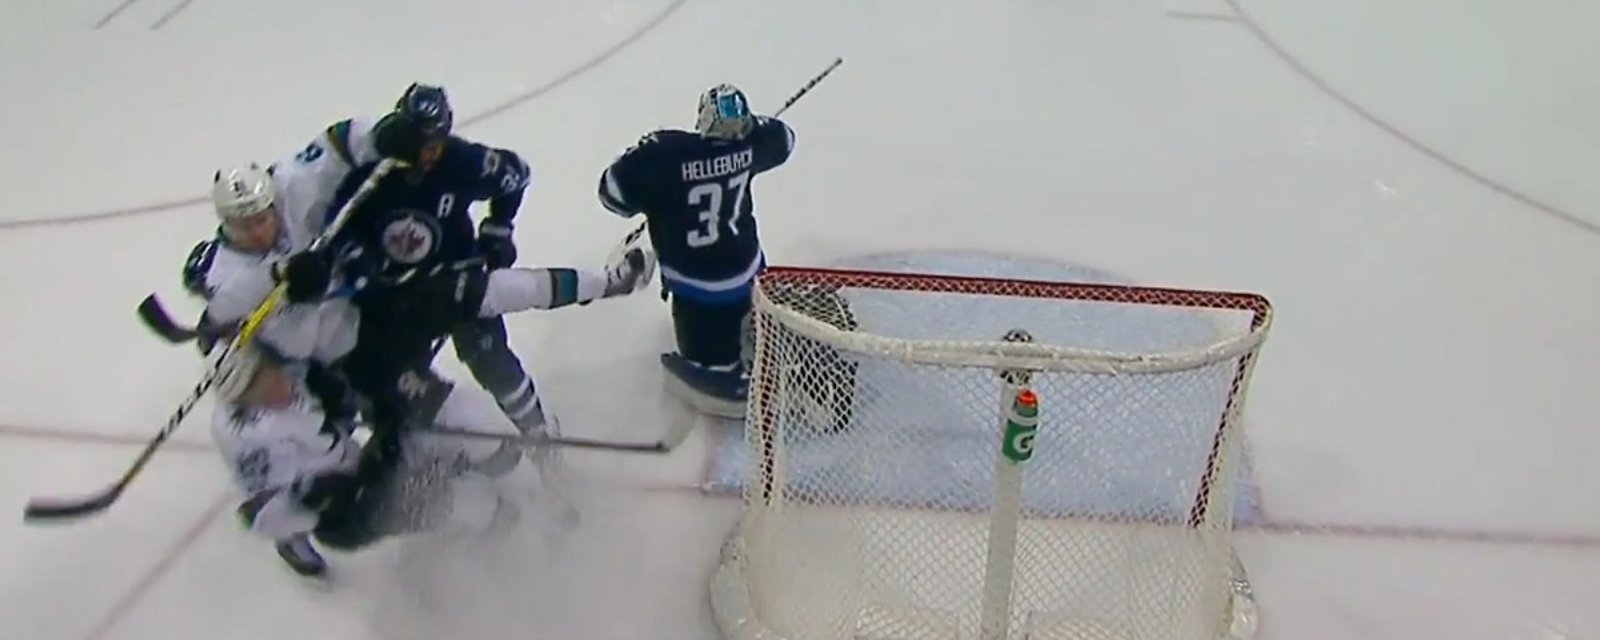 Dustin Byfuglien sends three players crashing into the boards with a single hit.